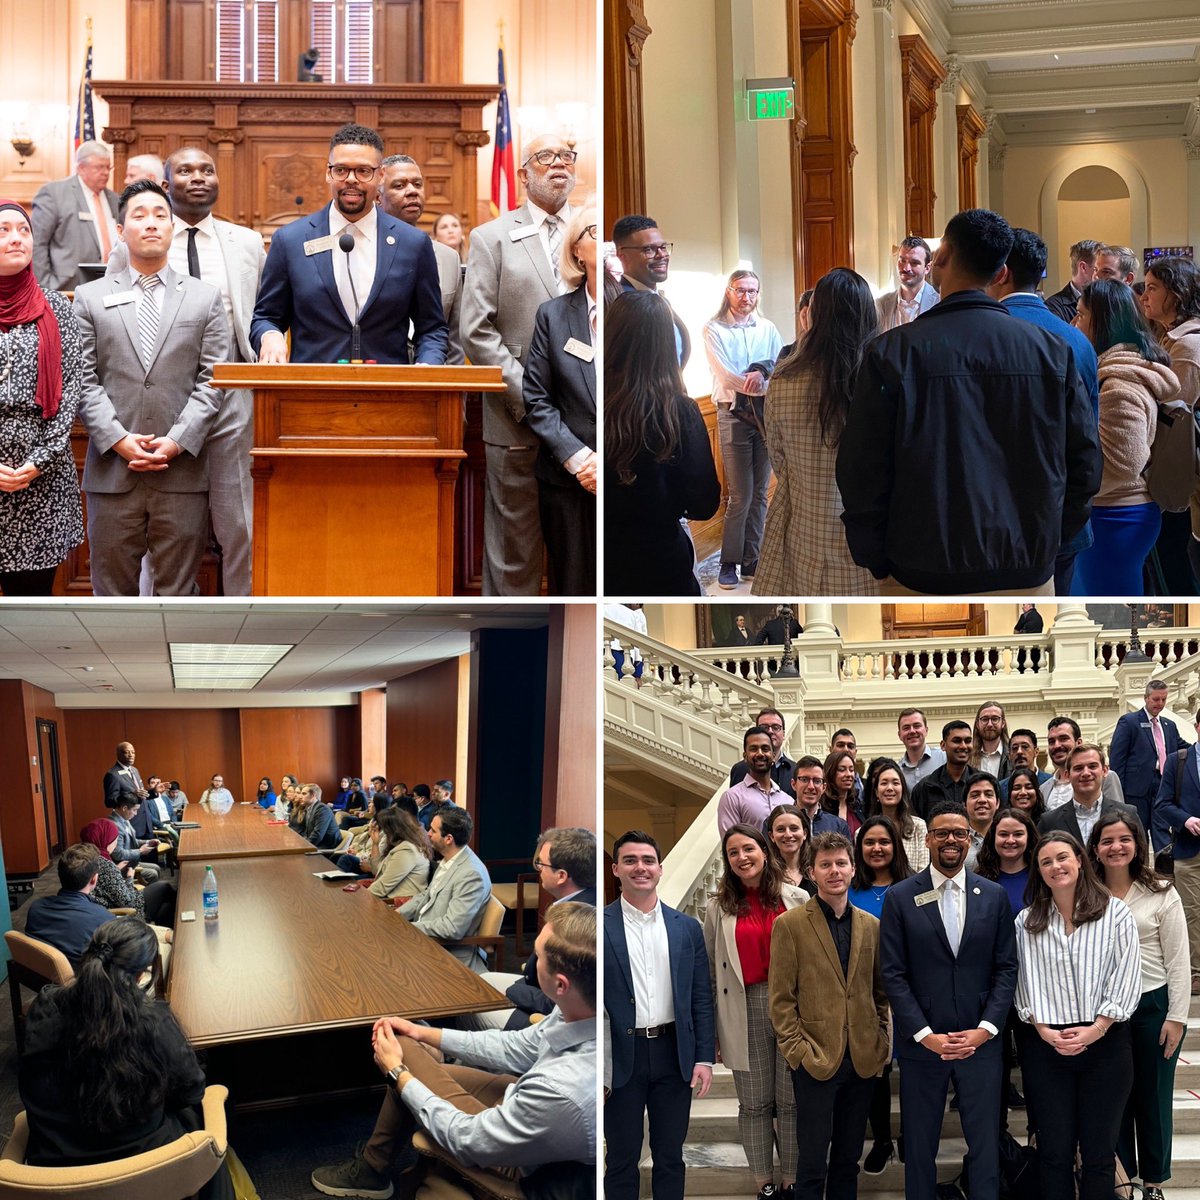 10 years ago, I graduated from Harvard Kennedy School. Last week, I had an amazing full circle experience hosting a group of students at the Capitol. Leadership in government is needed now more than ever. What a treat to discuss ideas and share insights in the thick of it all.